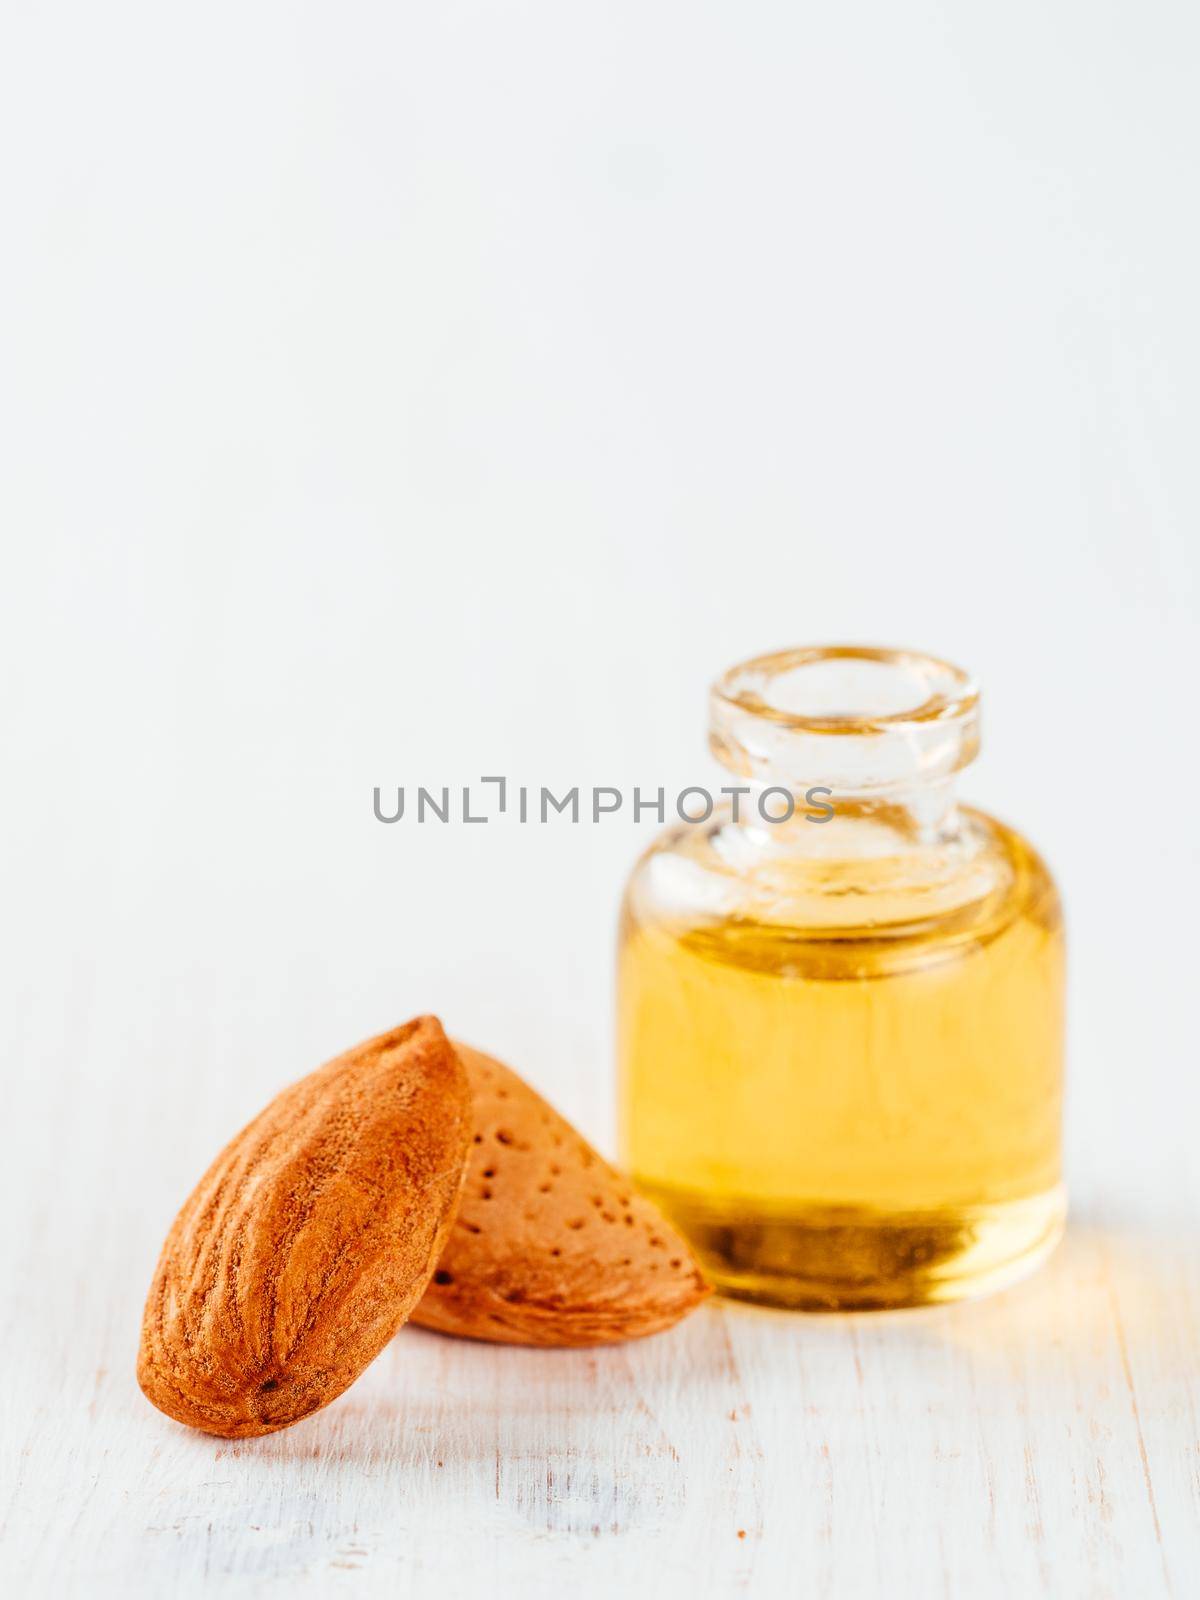 Small glass bottle of almond oil and almonds on white wooden tabletop with copy space. Vertical